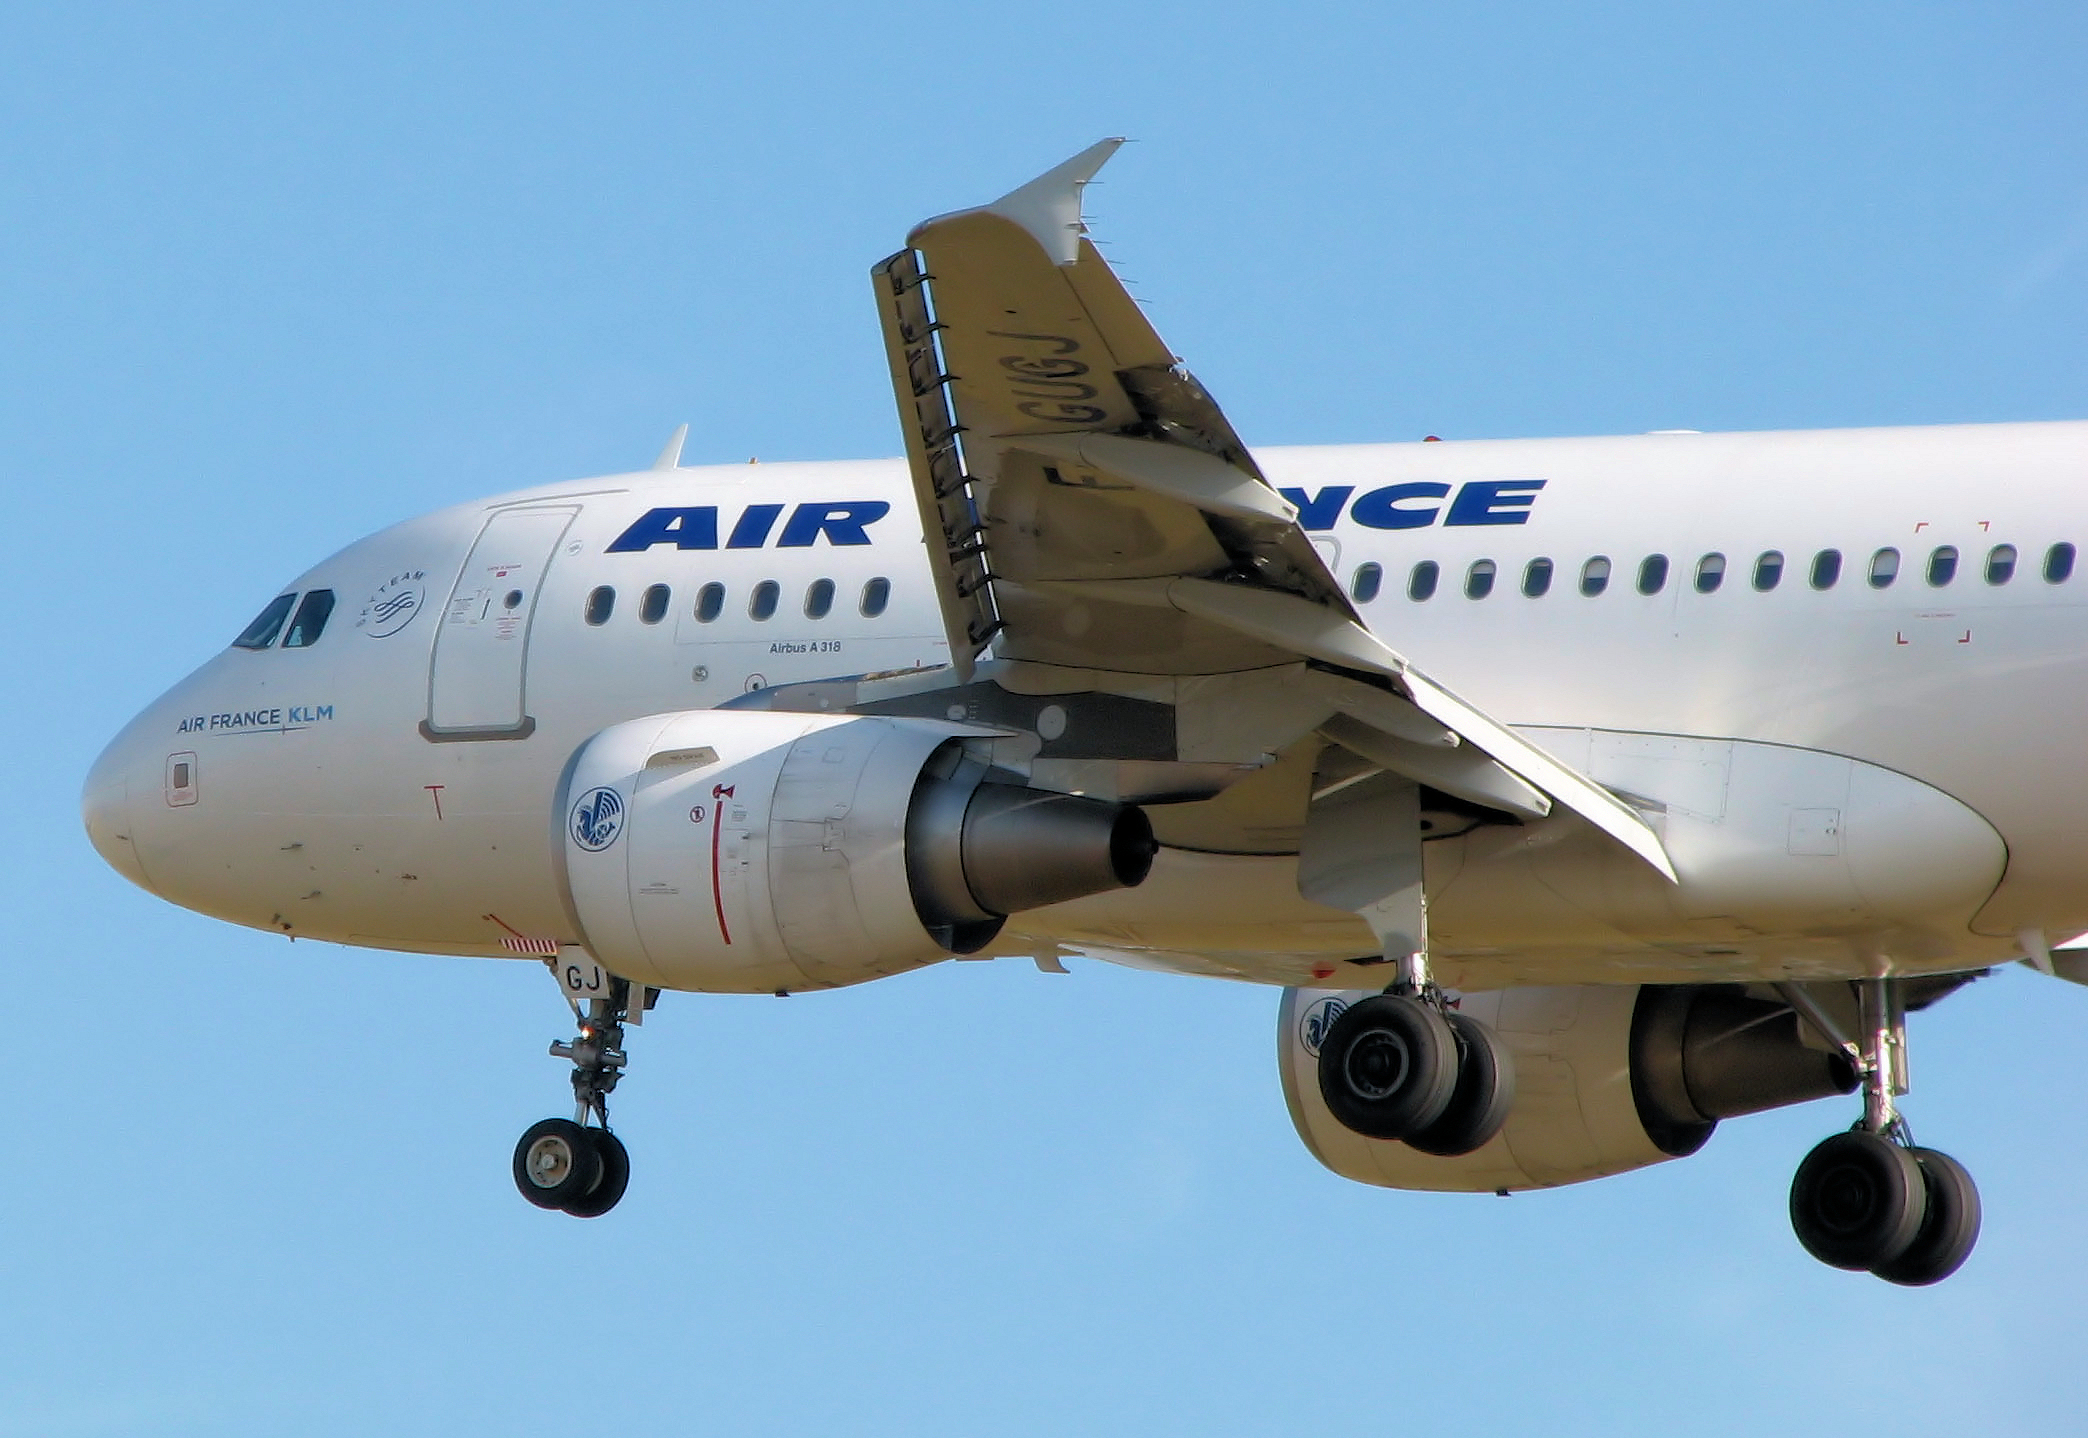 Airfrance.a318-100.f-gugj.arp